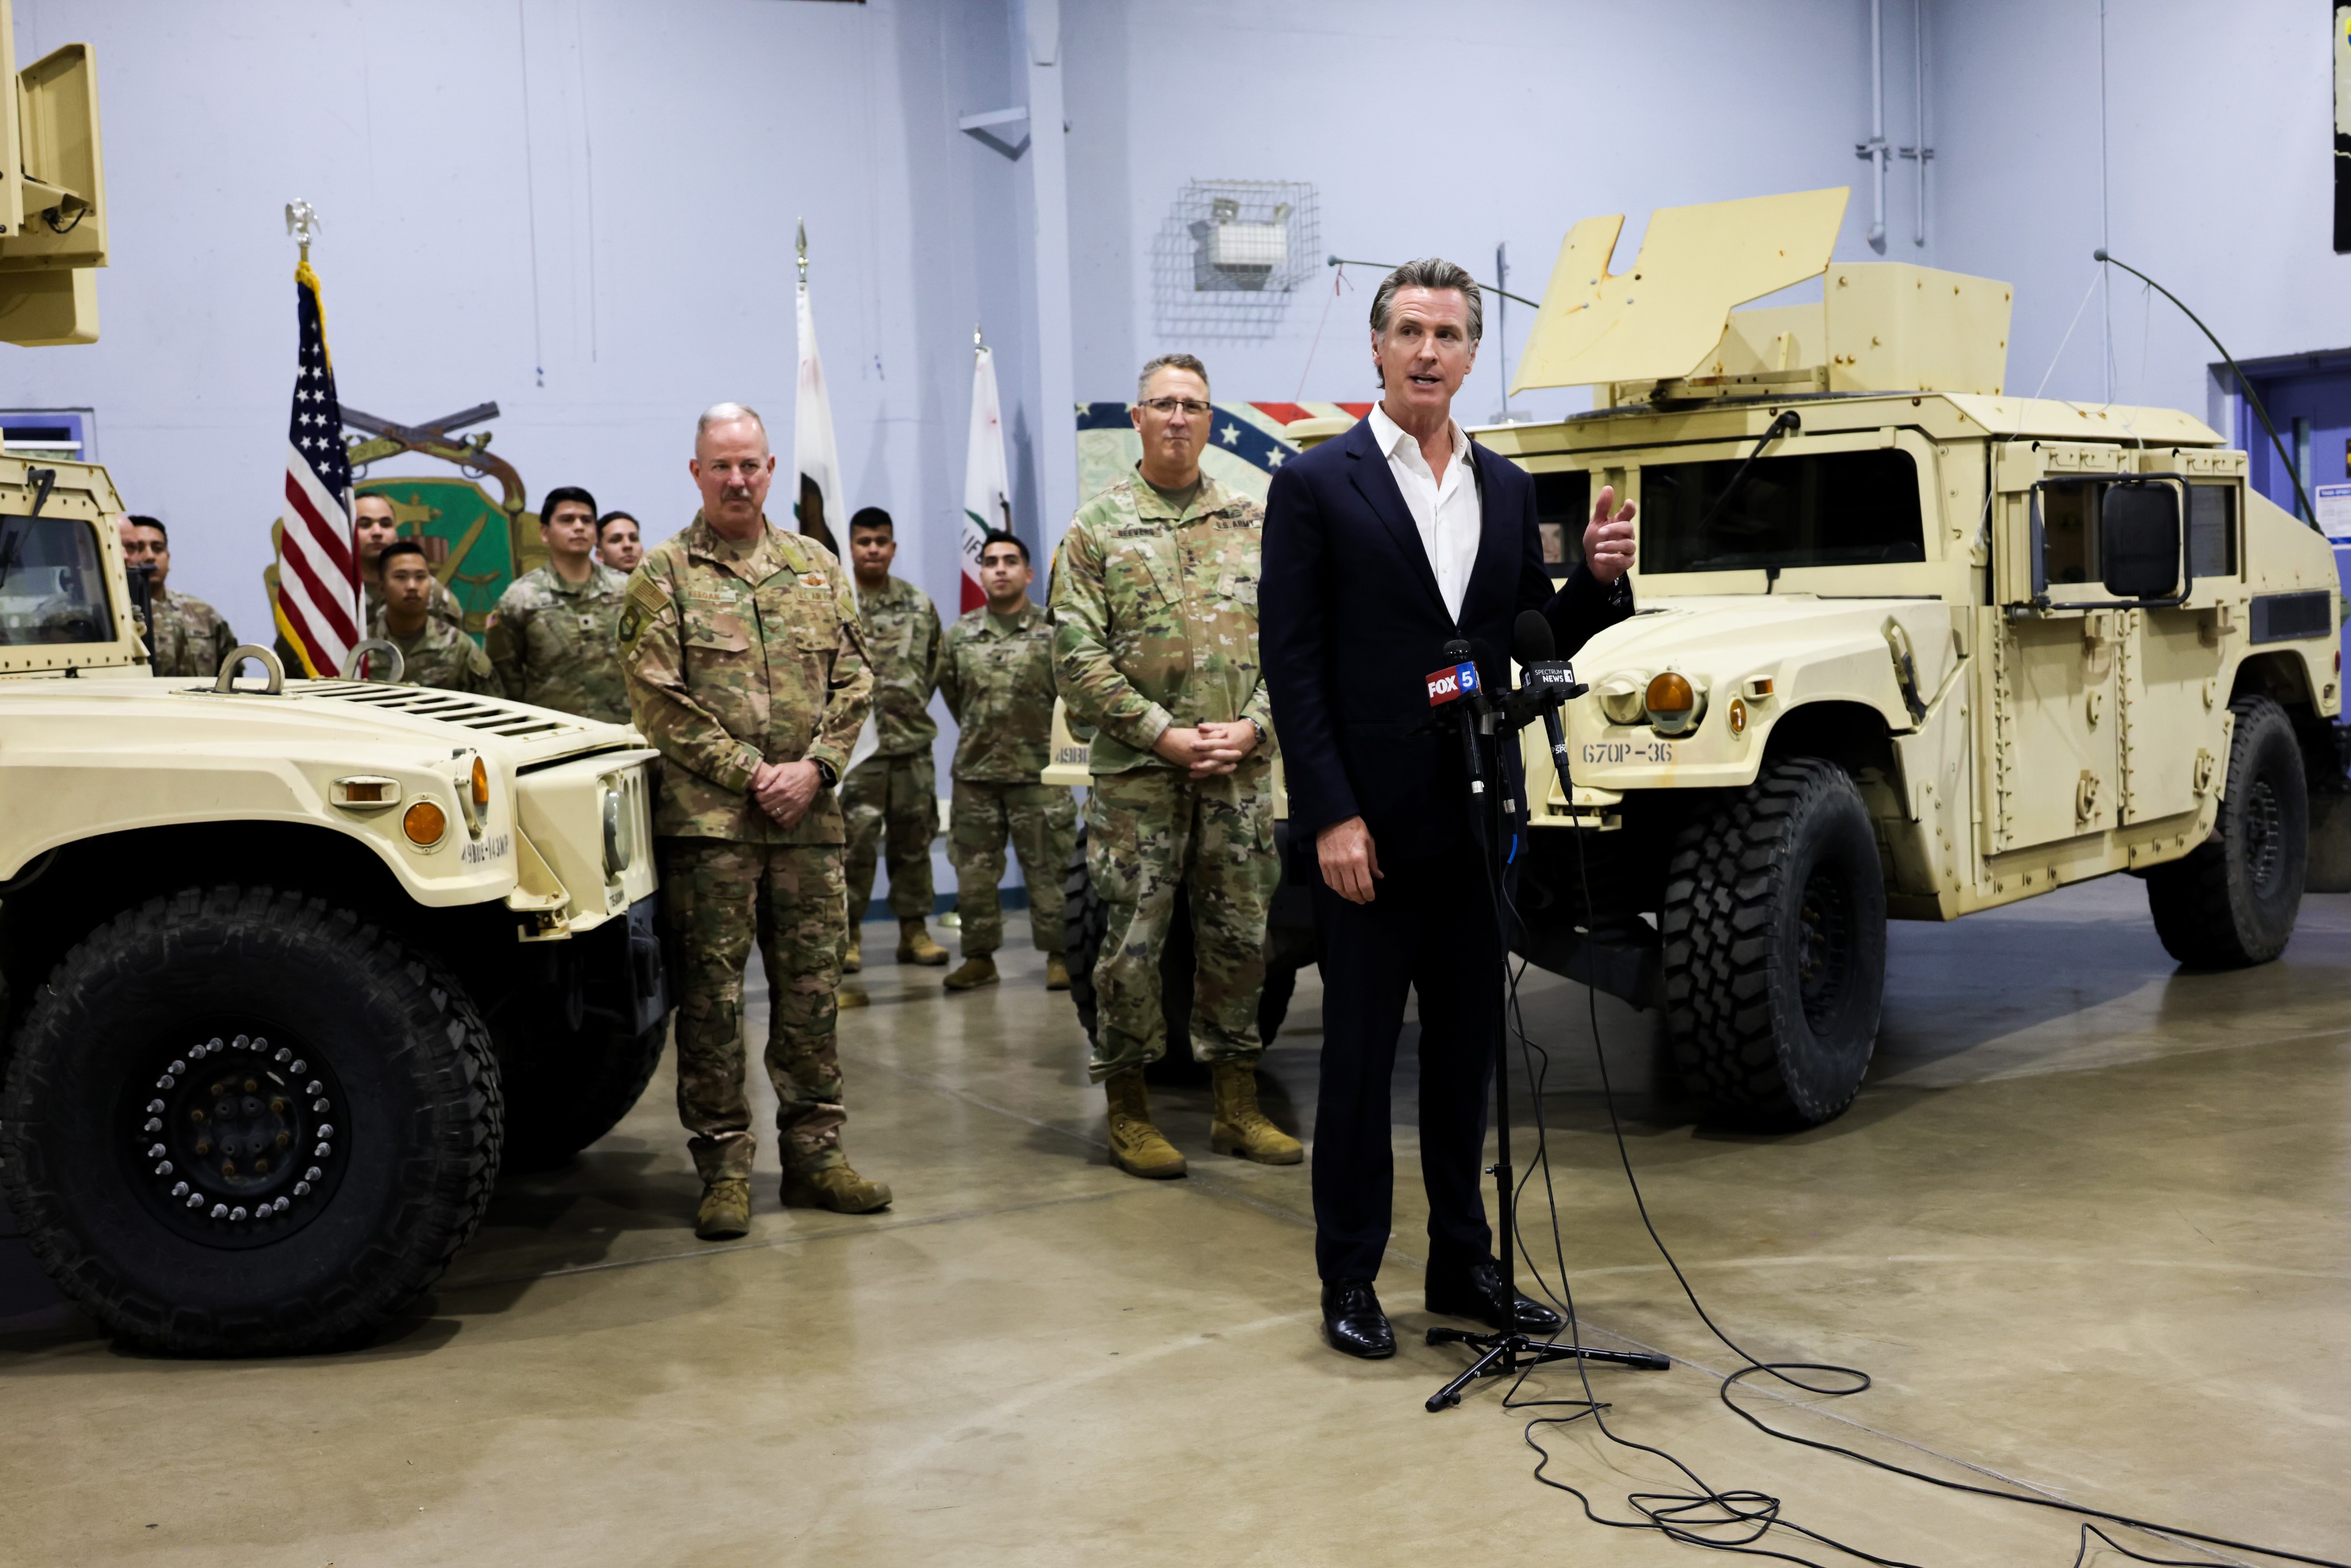 Governor Newsom standing in front of two military vehicles and a group of Cal Guard members